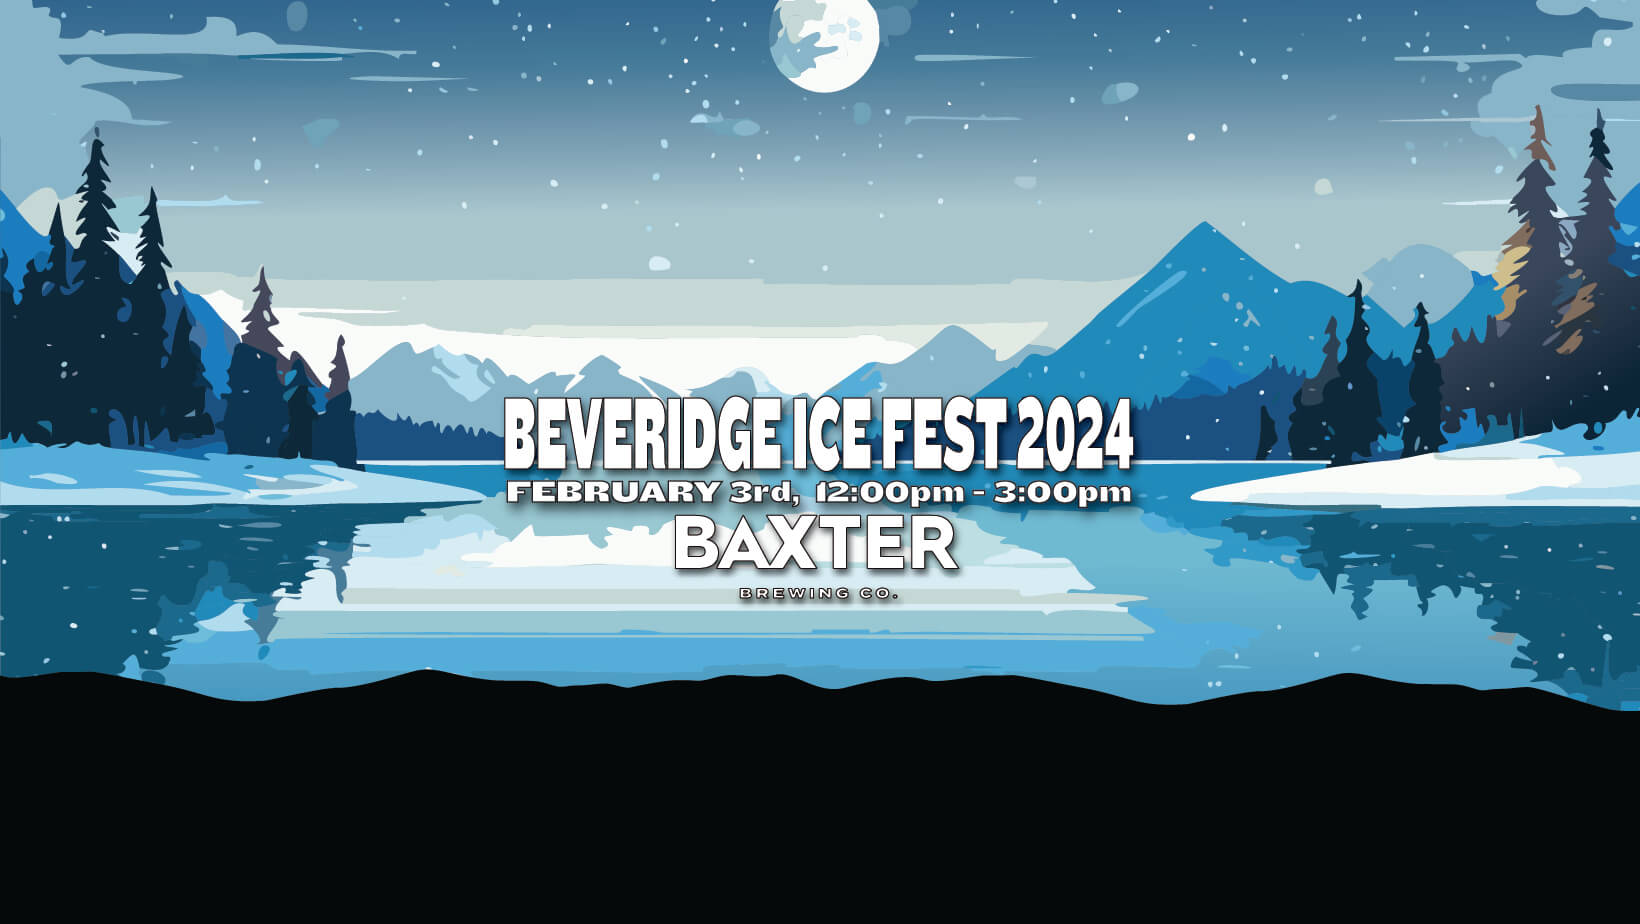 image promoting an event on february 3rd beveridge Ice fest